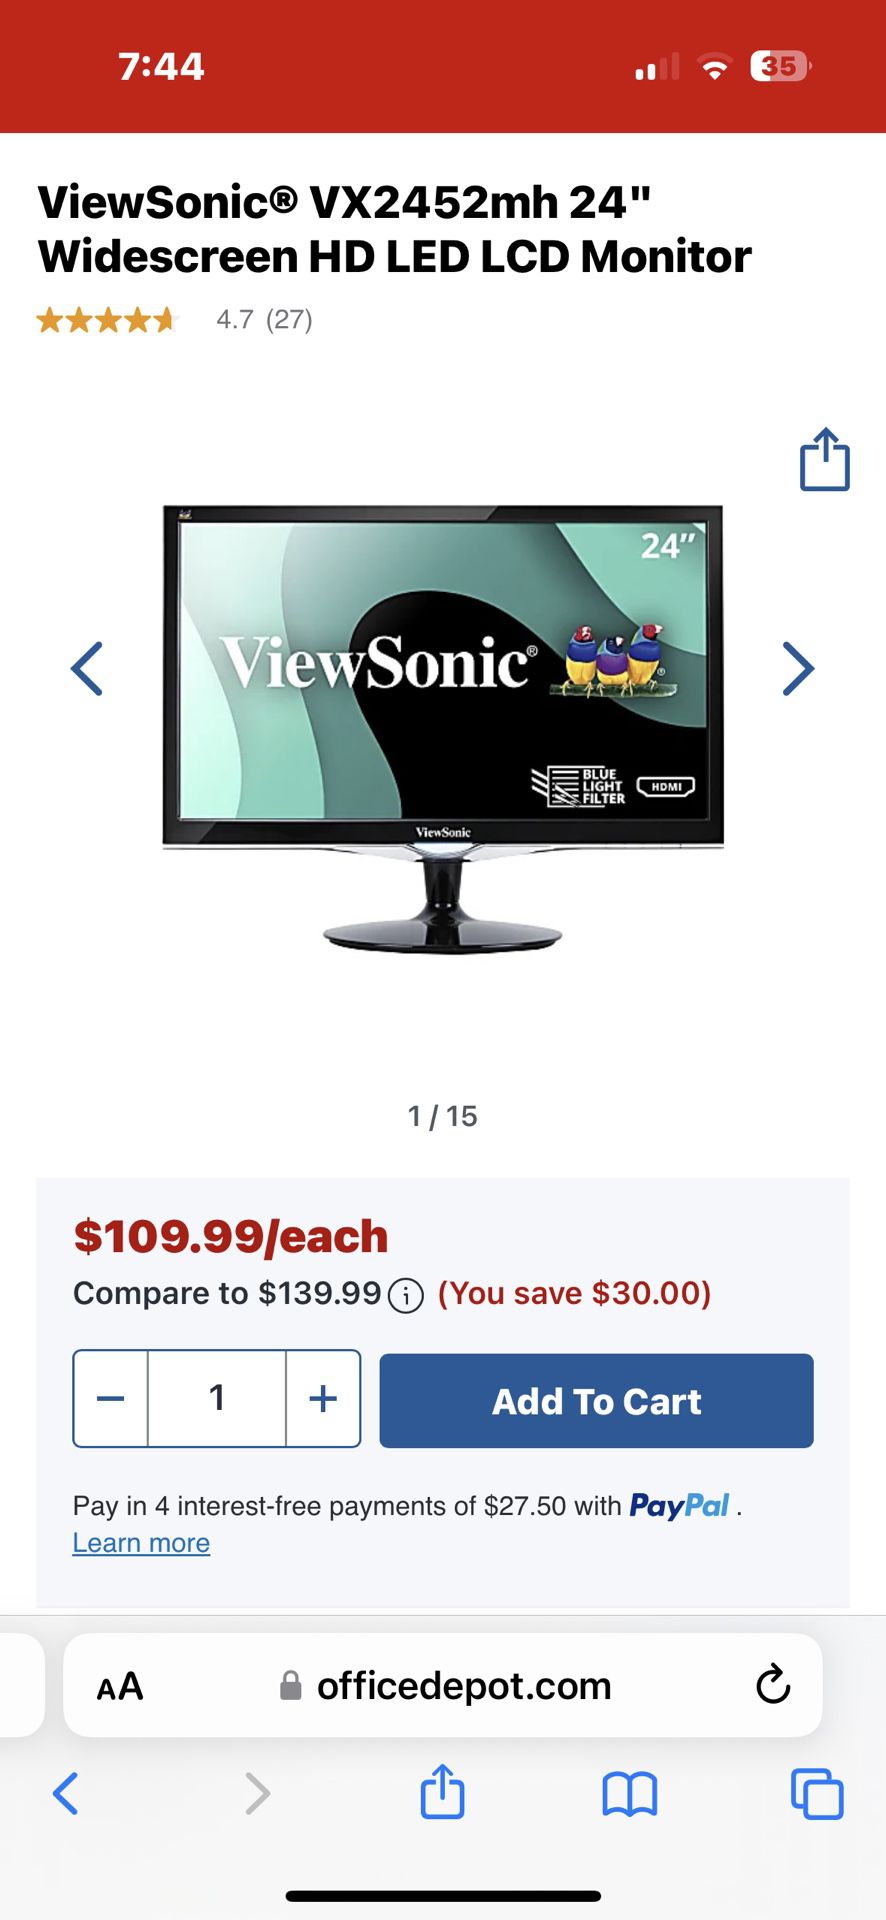 ViewSonic 24" (23.6" Viewable) Widescreen LED monitor